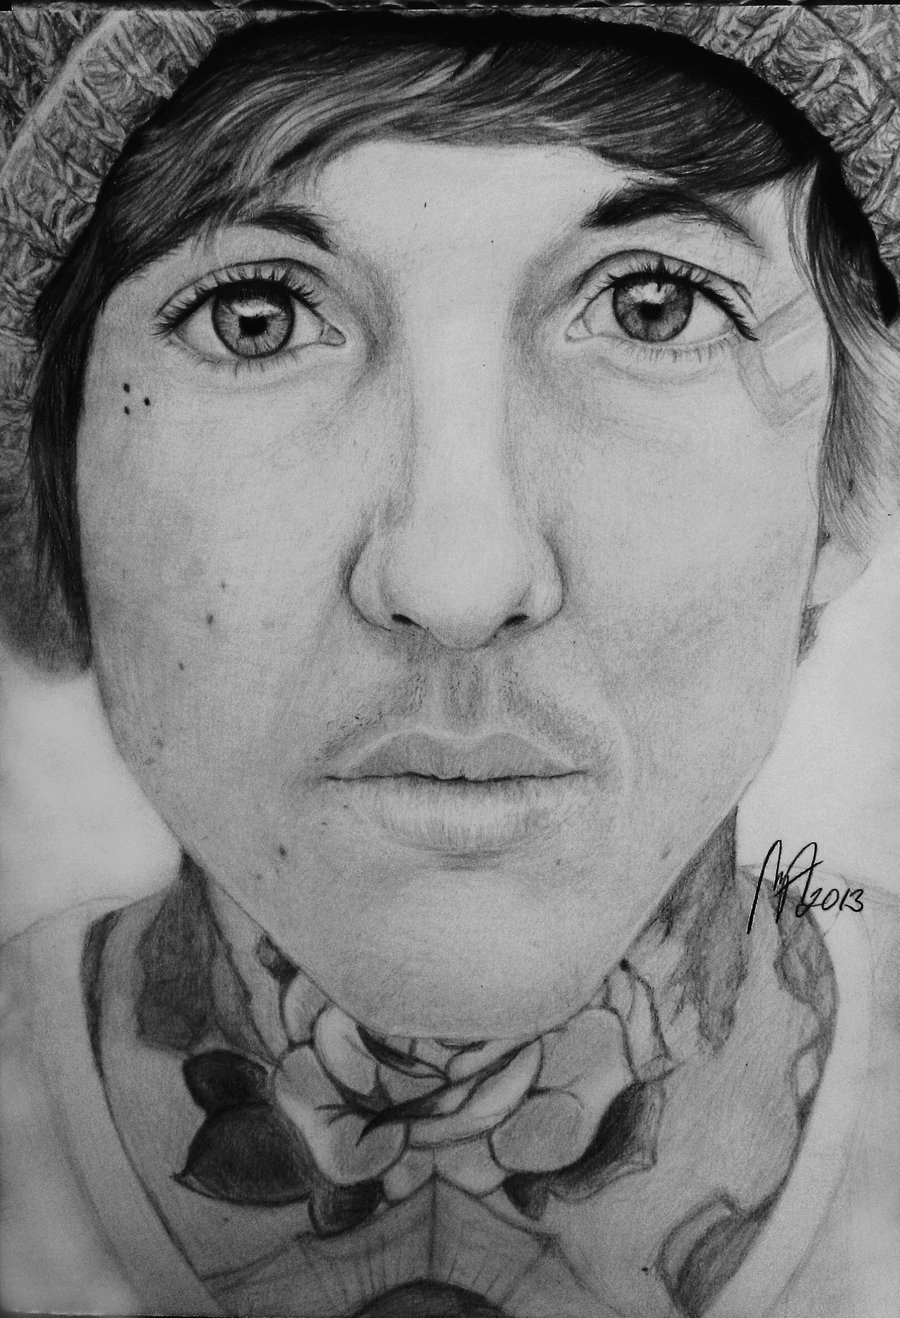 OLIVER SYKES♥